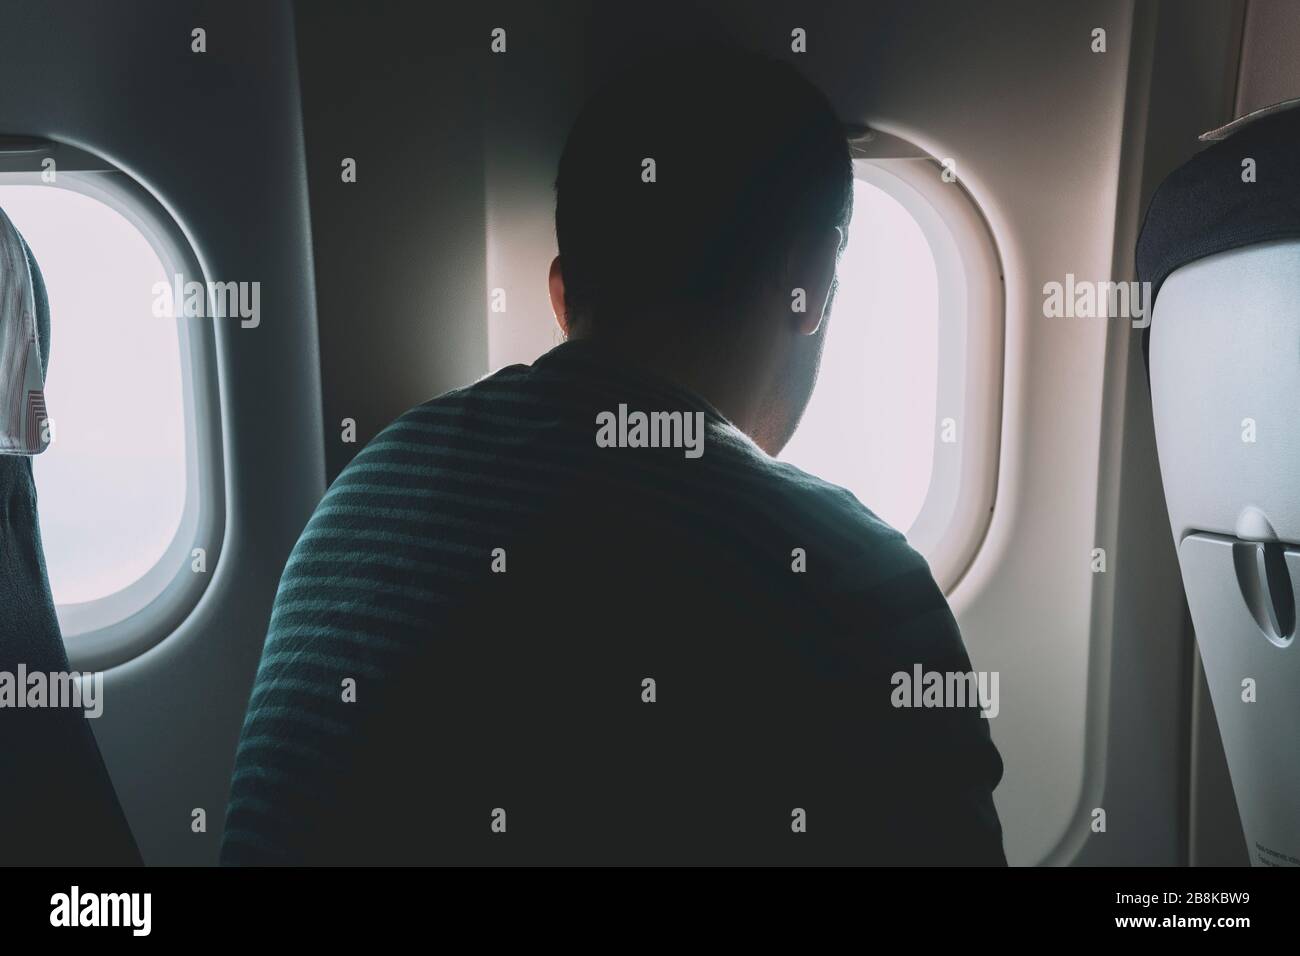 A back view of a man seated on an airplane, watching the view from the plane window. Stock Photo